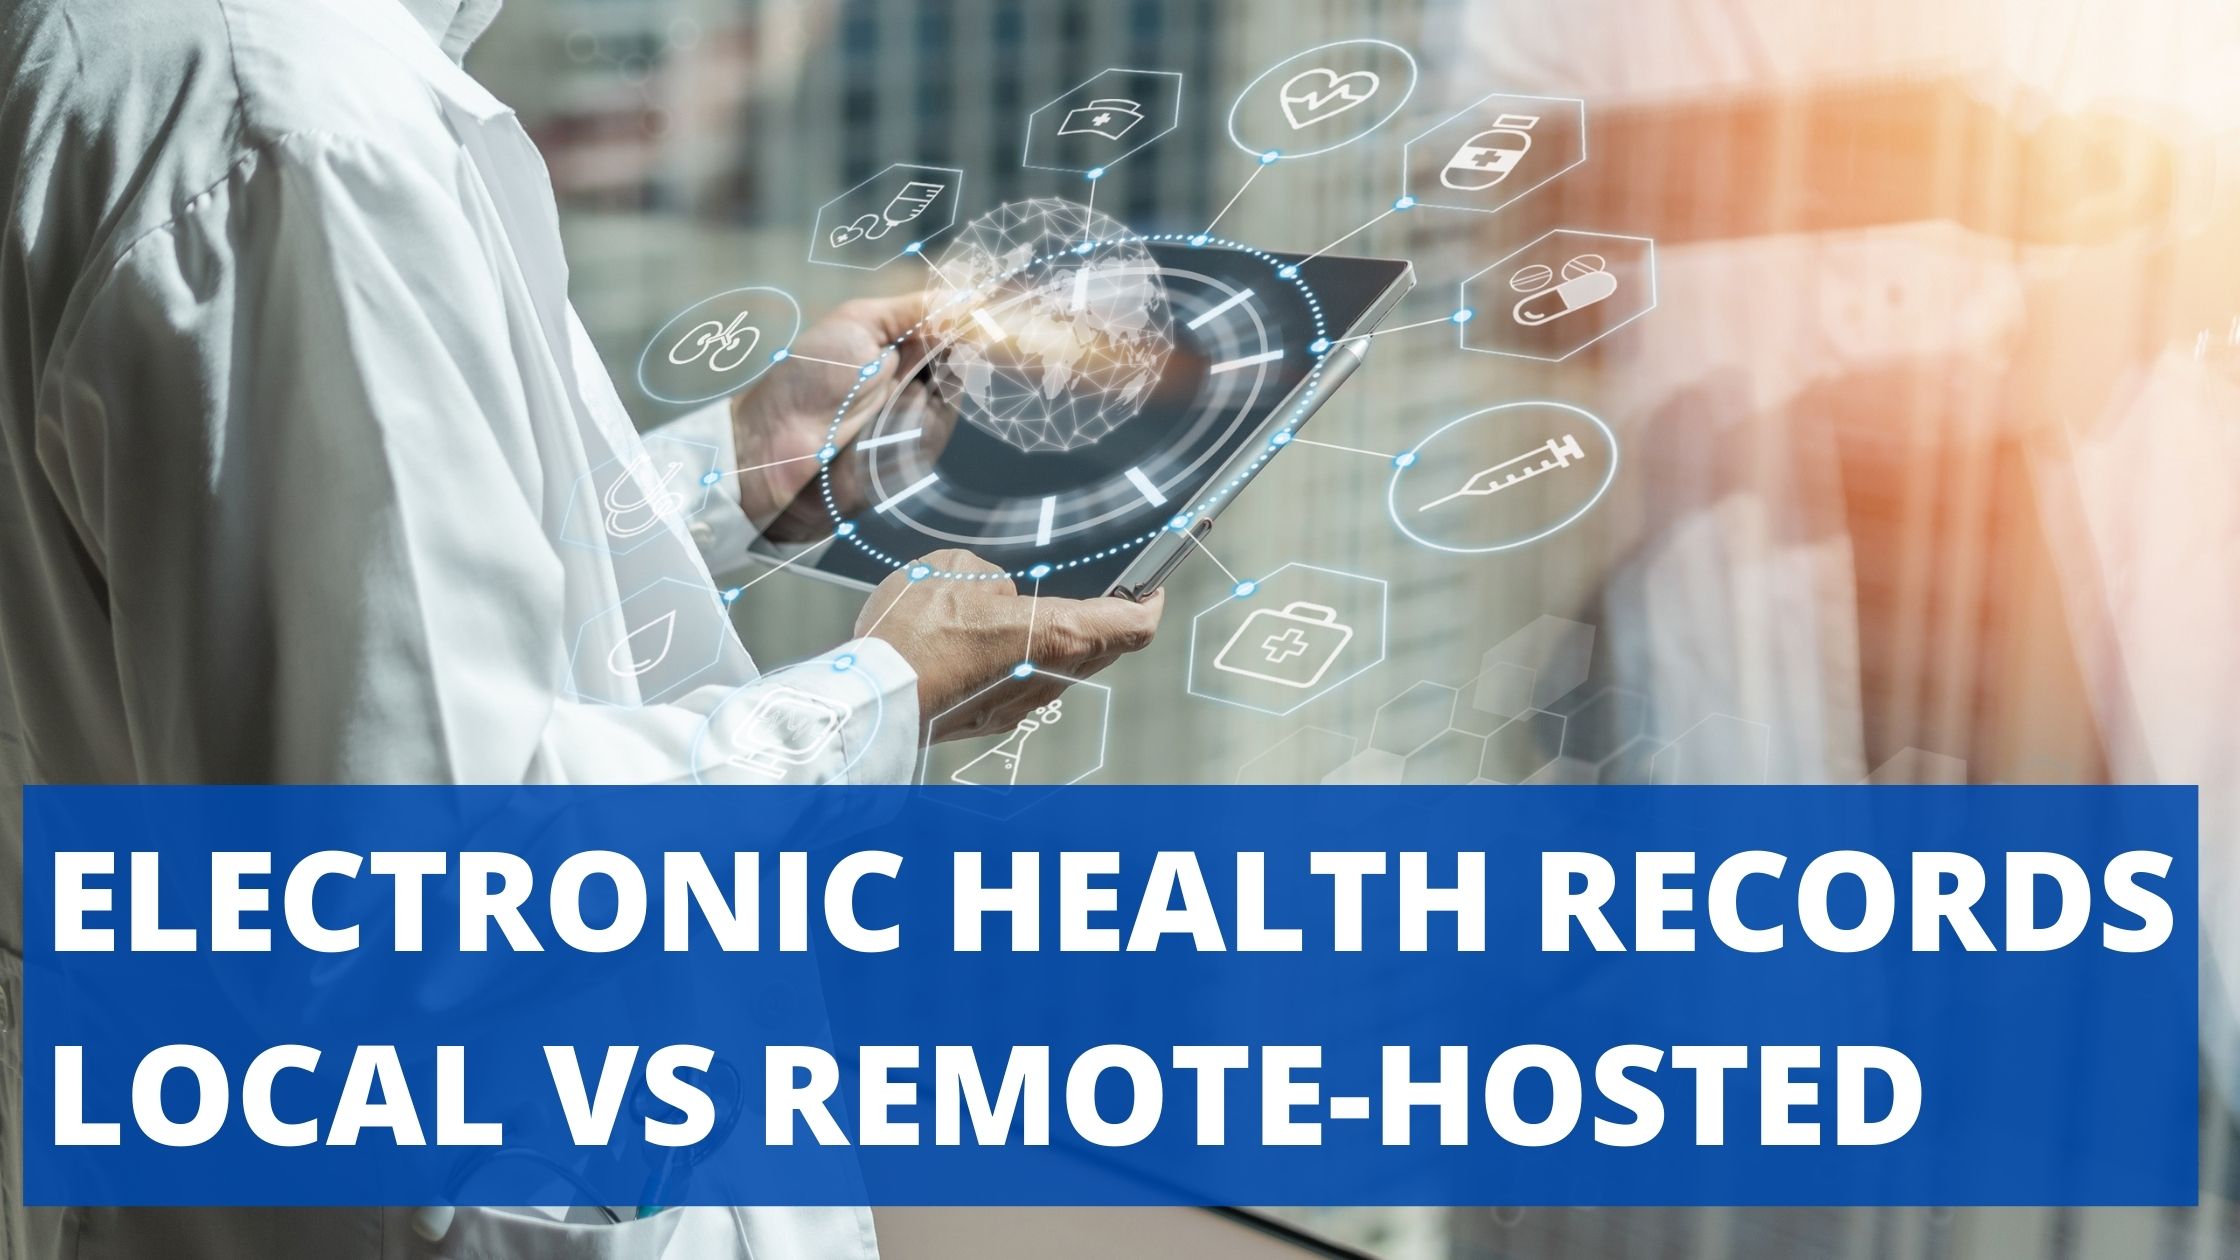 Electronic Health Records Local EHR vs Remote-Hosted EHR